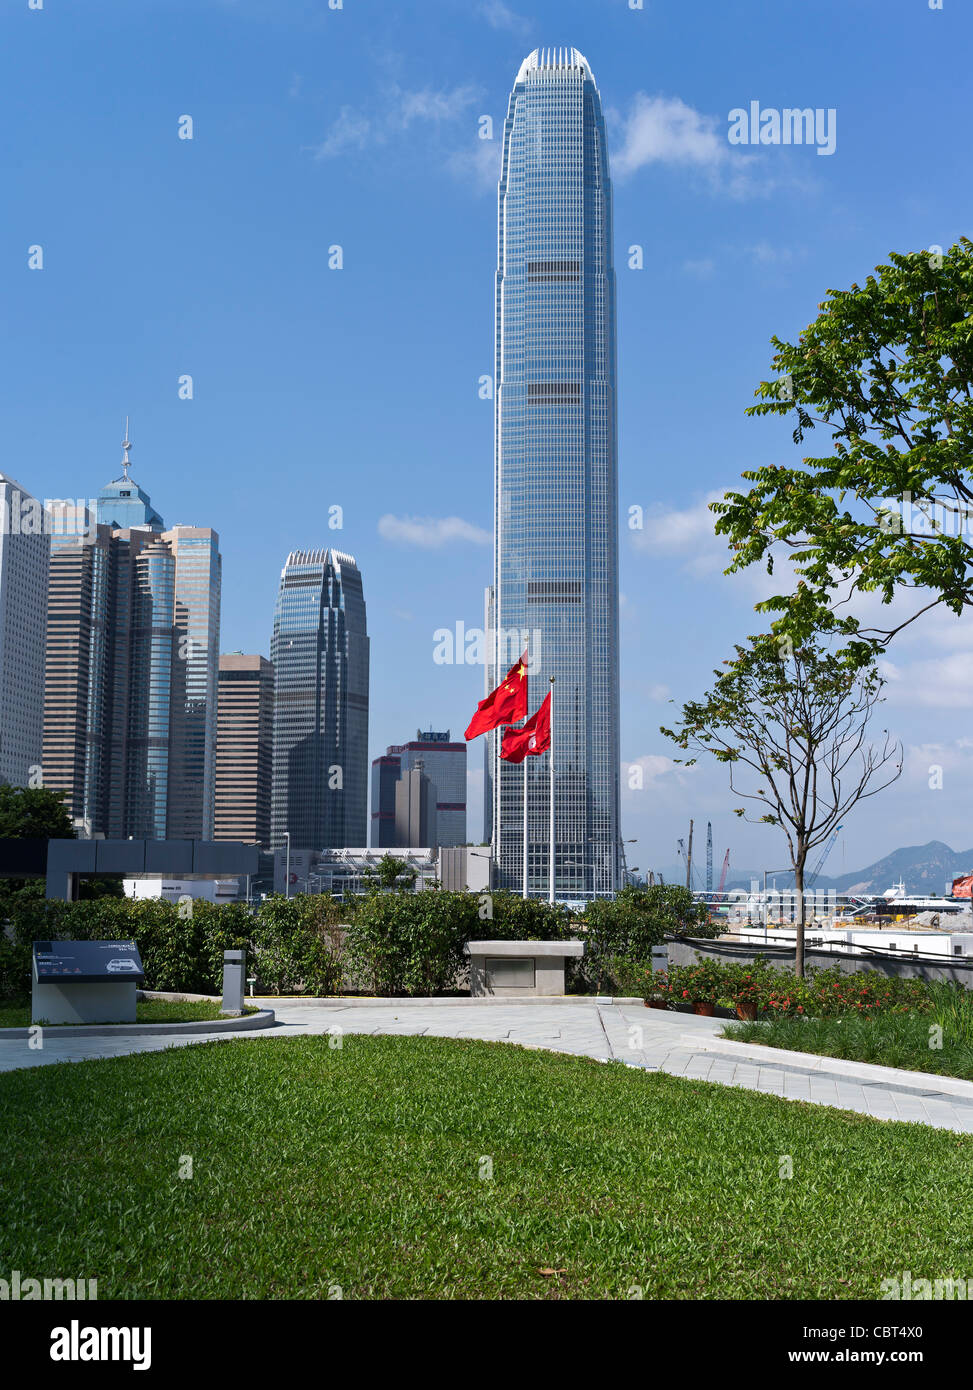 dh  ADMIRALTY HONG KONG Tamar park IFC 2 tower Chinese flag and Hong Kong flags Legco garden china skyscraper cityscape central daytime Stock Photo